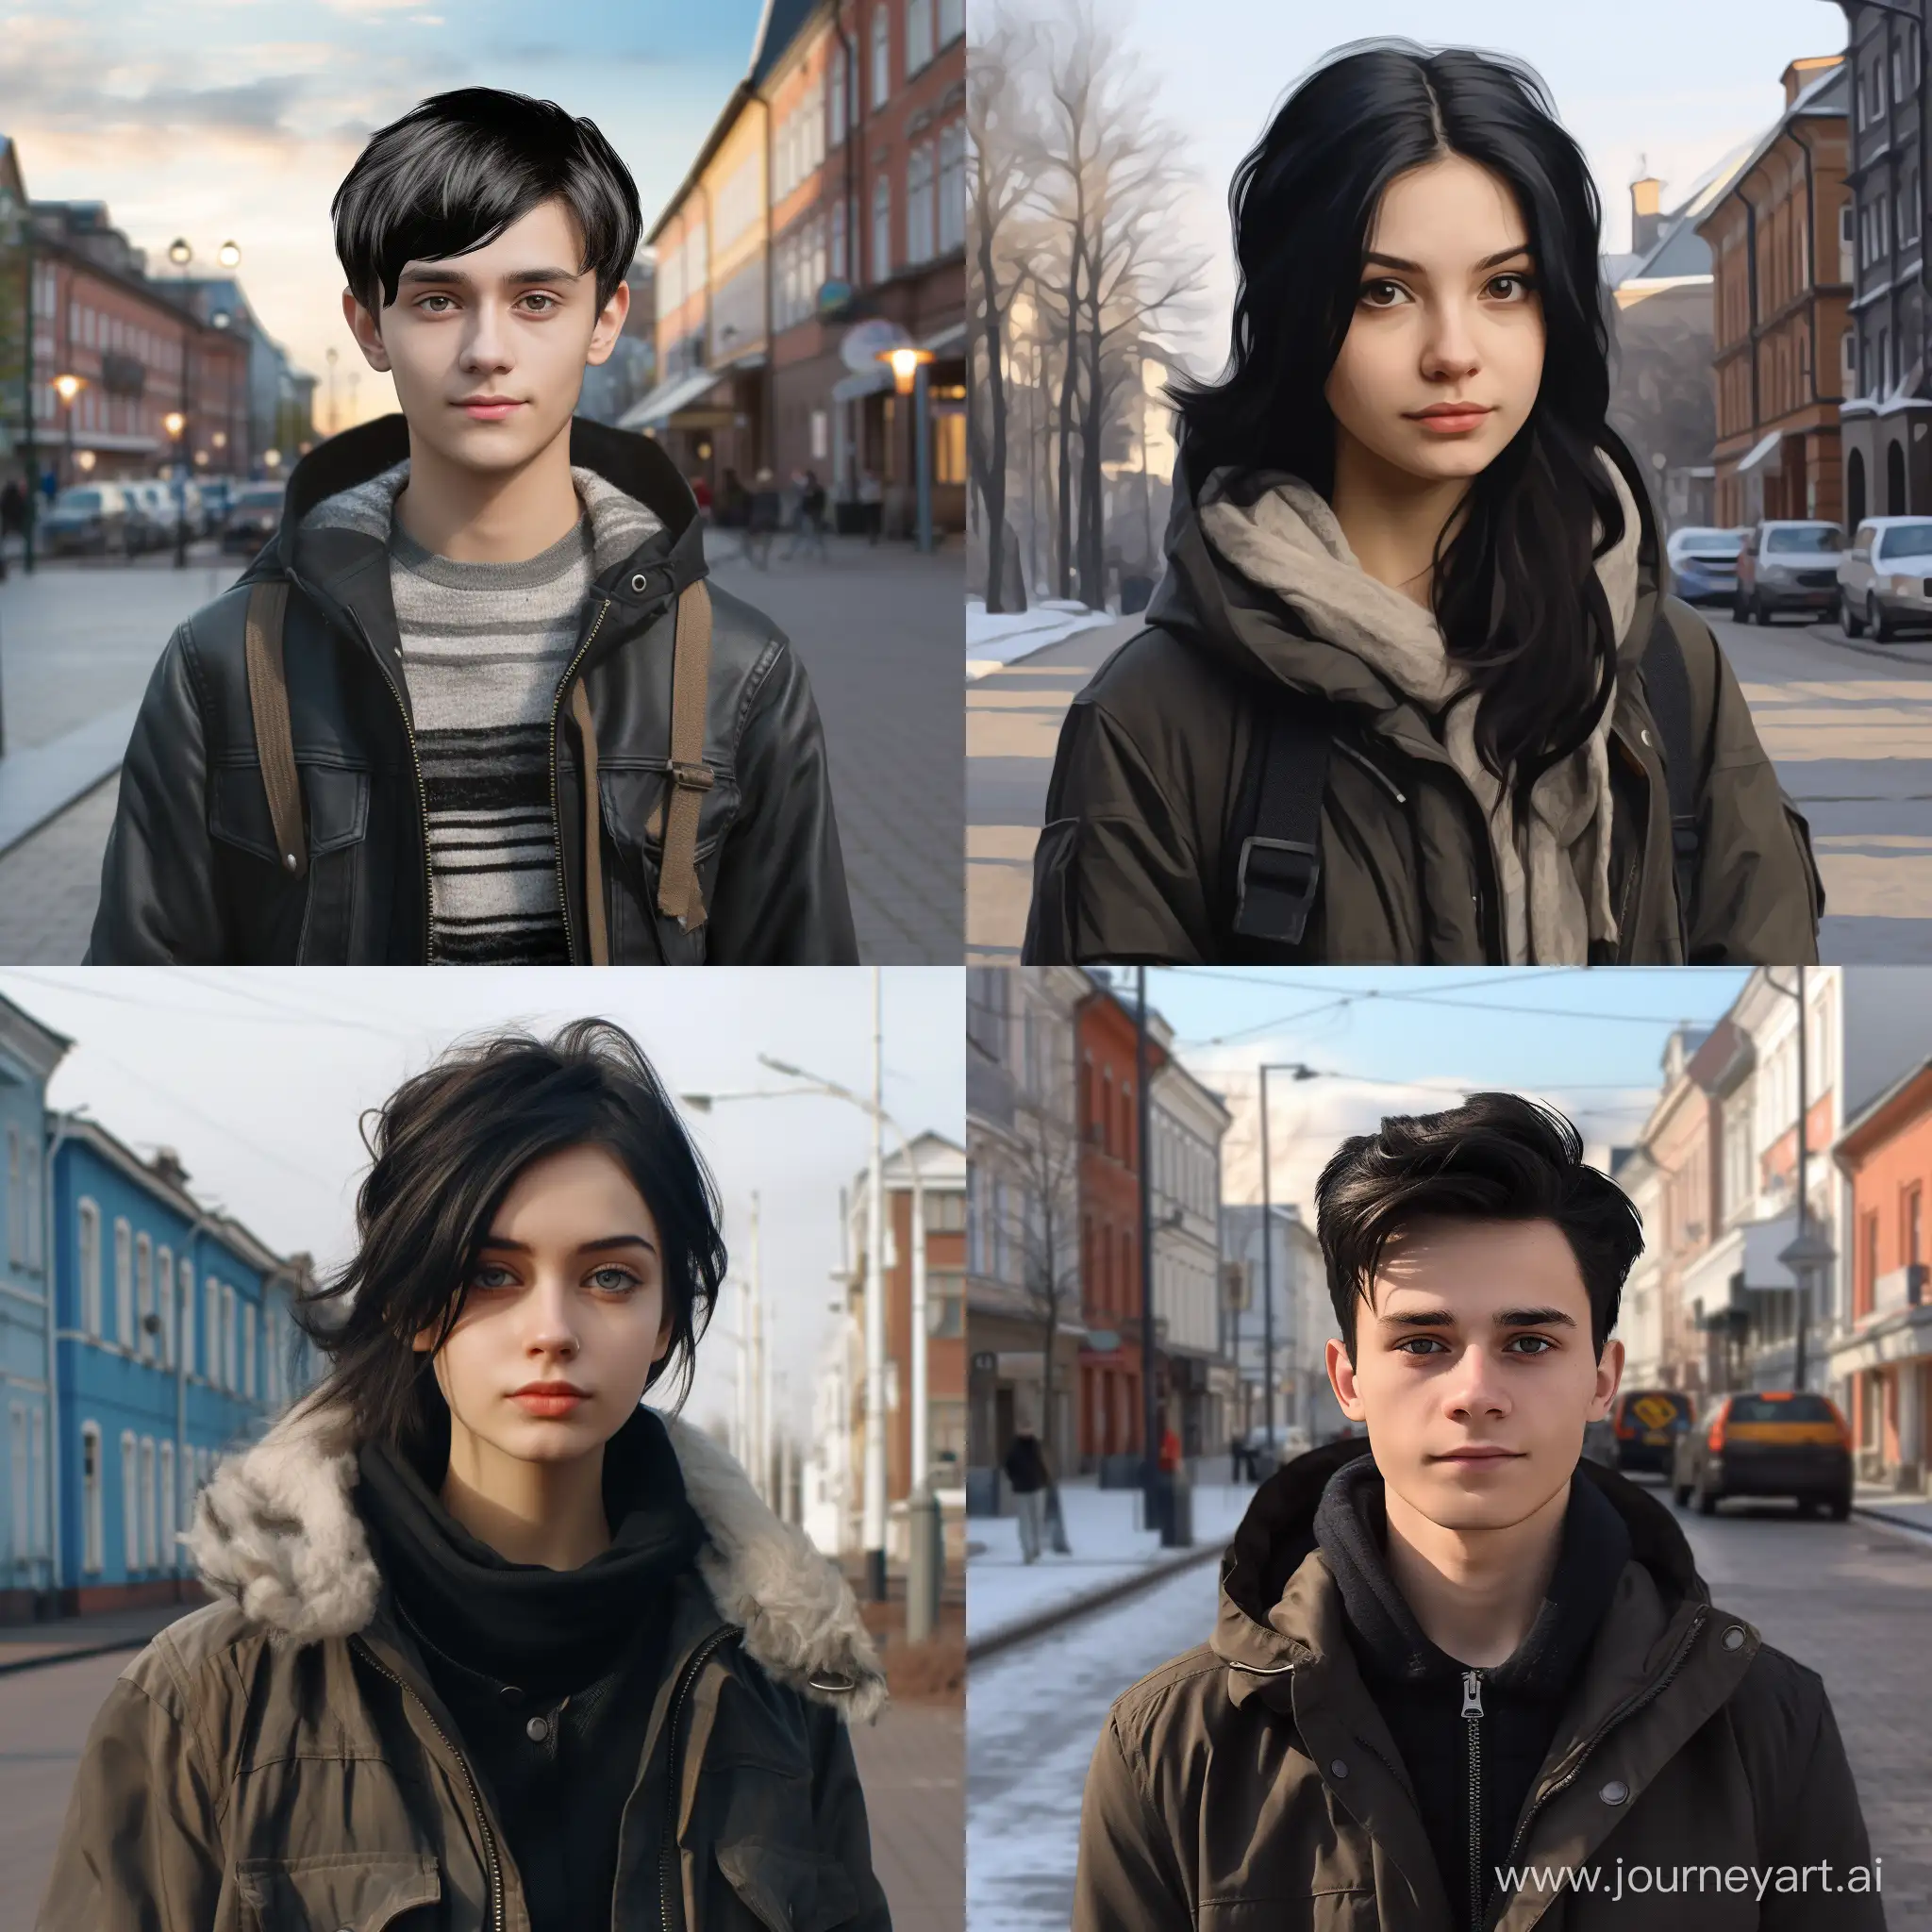 Generate a realistic image of a young person with black hair and light clothing in the city of Kaliningrad.